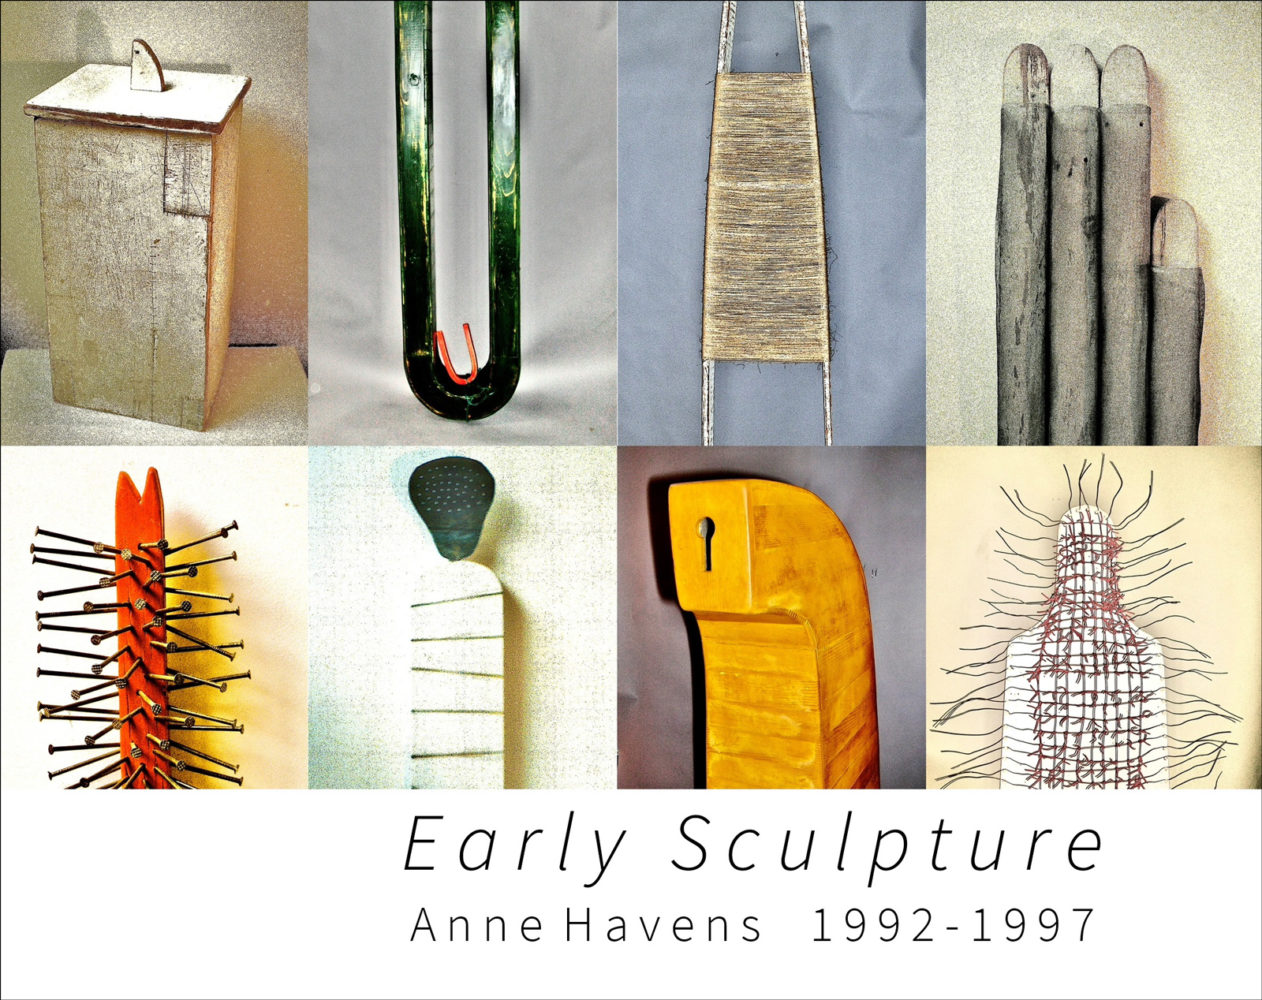 Cover of Anne Havens "Early Sculpture" 1992 - 1997